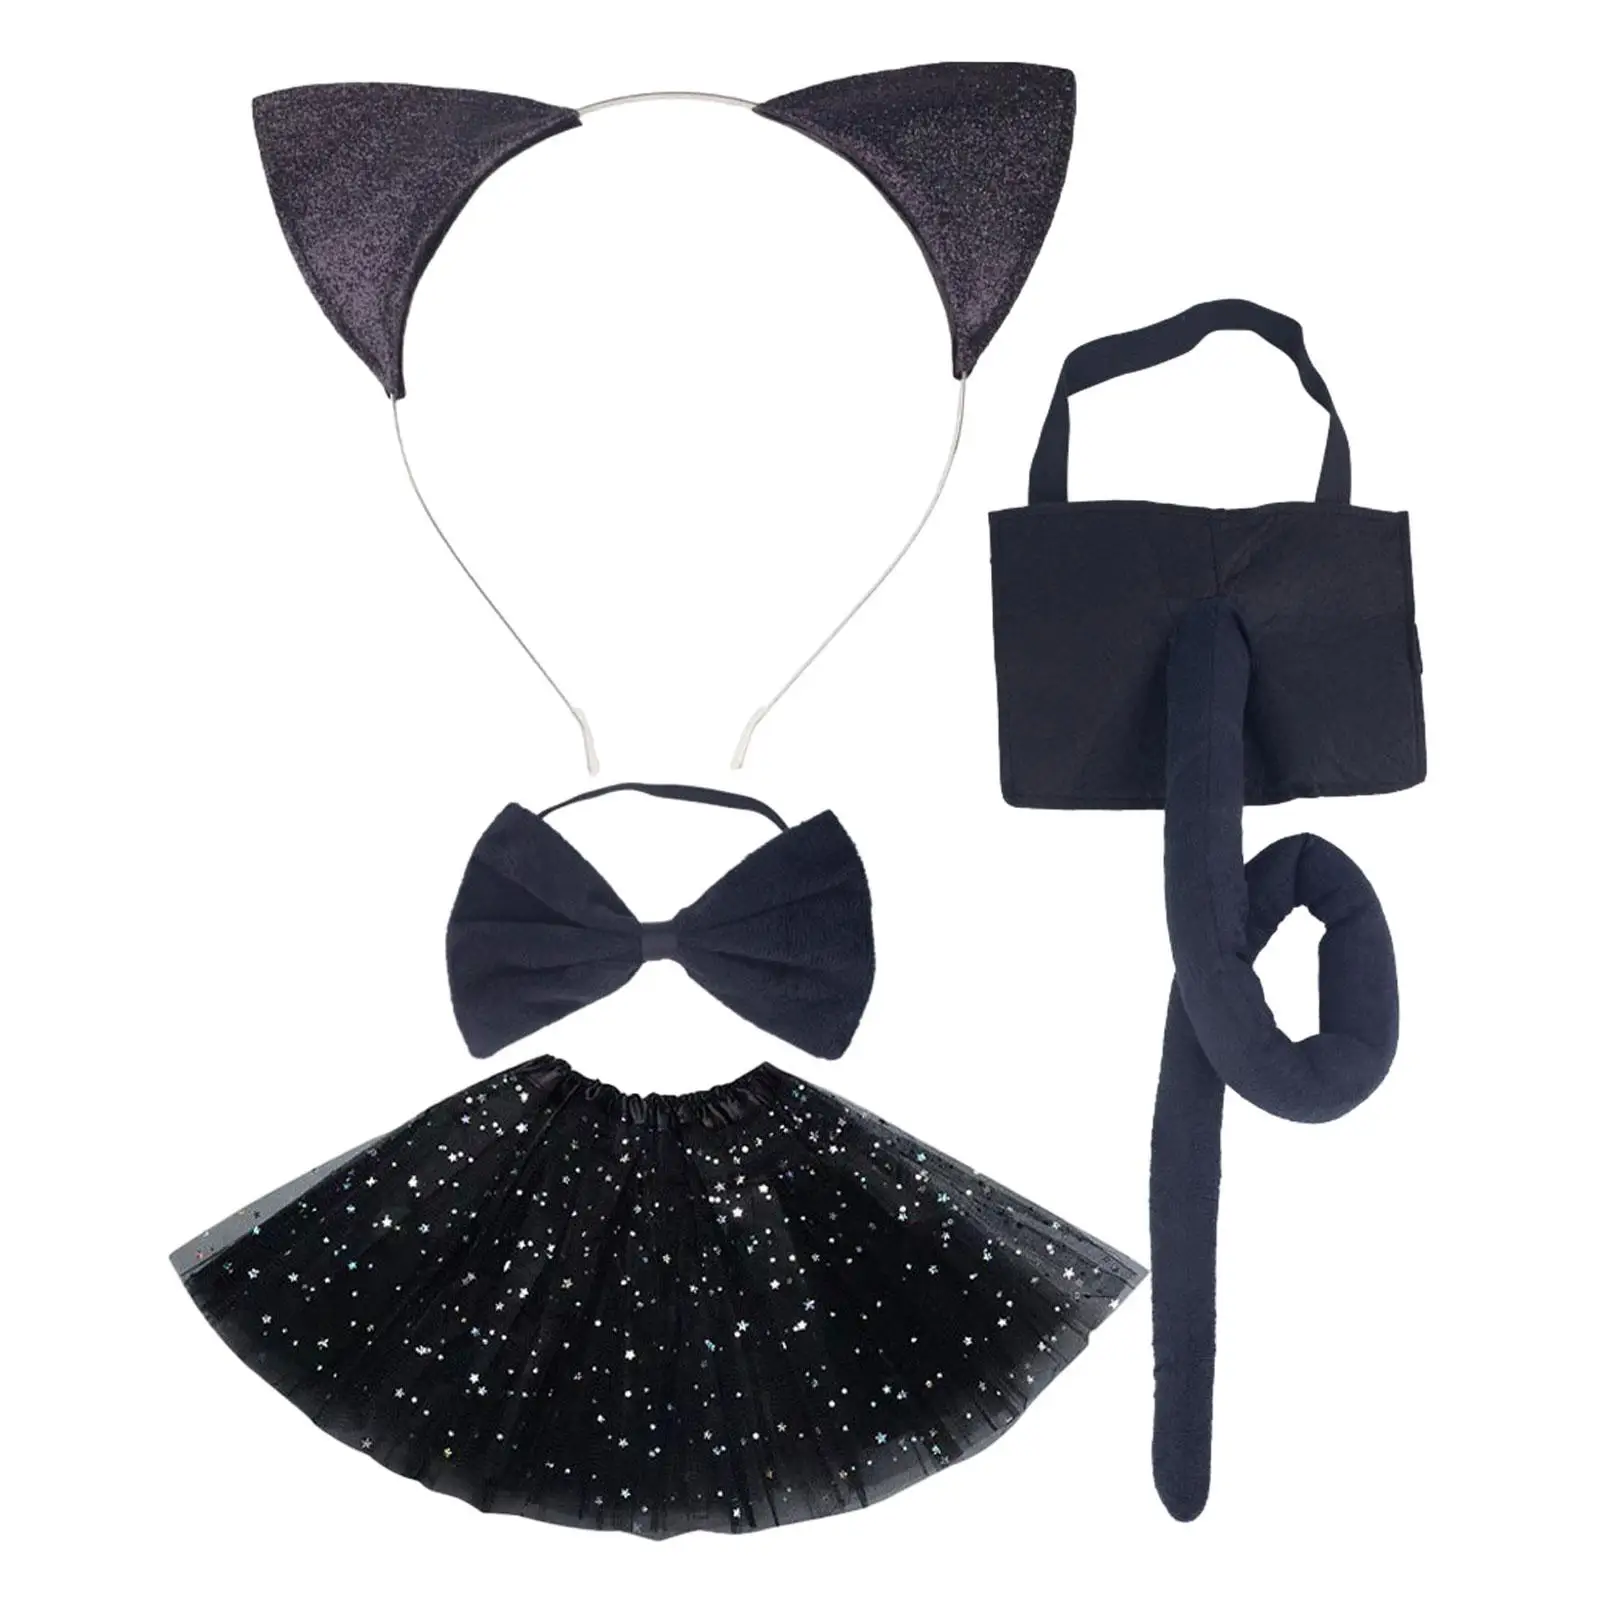 Kids Cat Ears, Bow Tie and Tail Set Comfortable Animal Costume Set for Themed Party Performance Dressing up Birthdays Roles Play